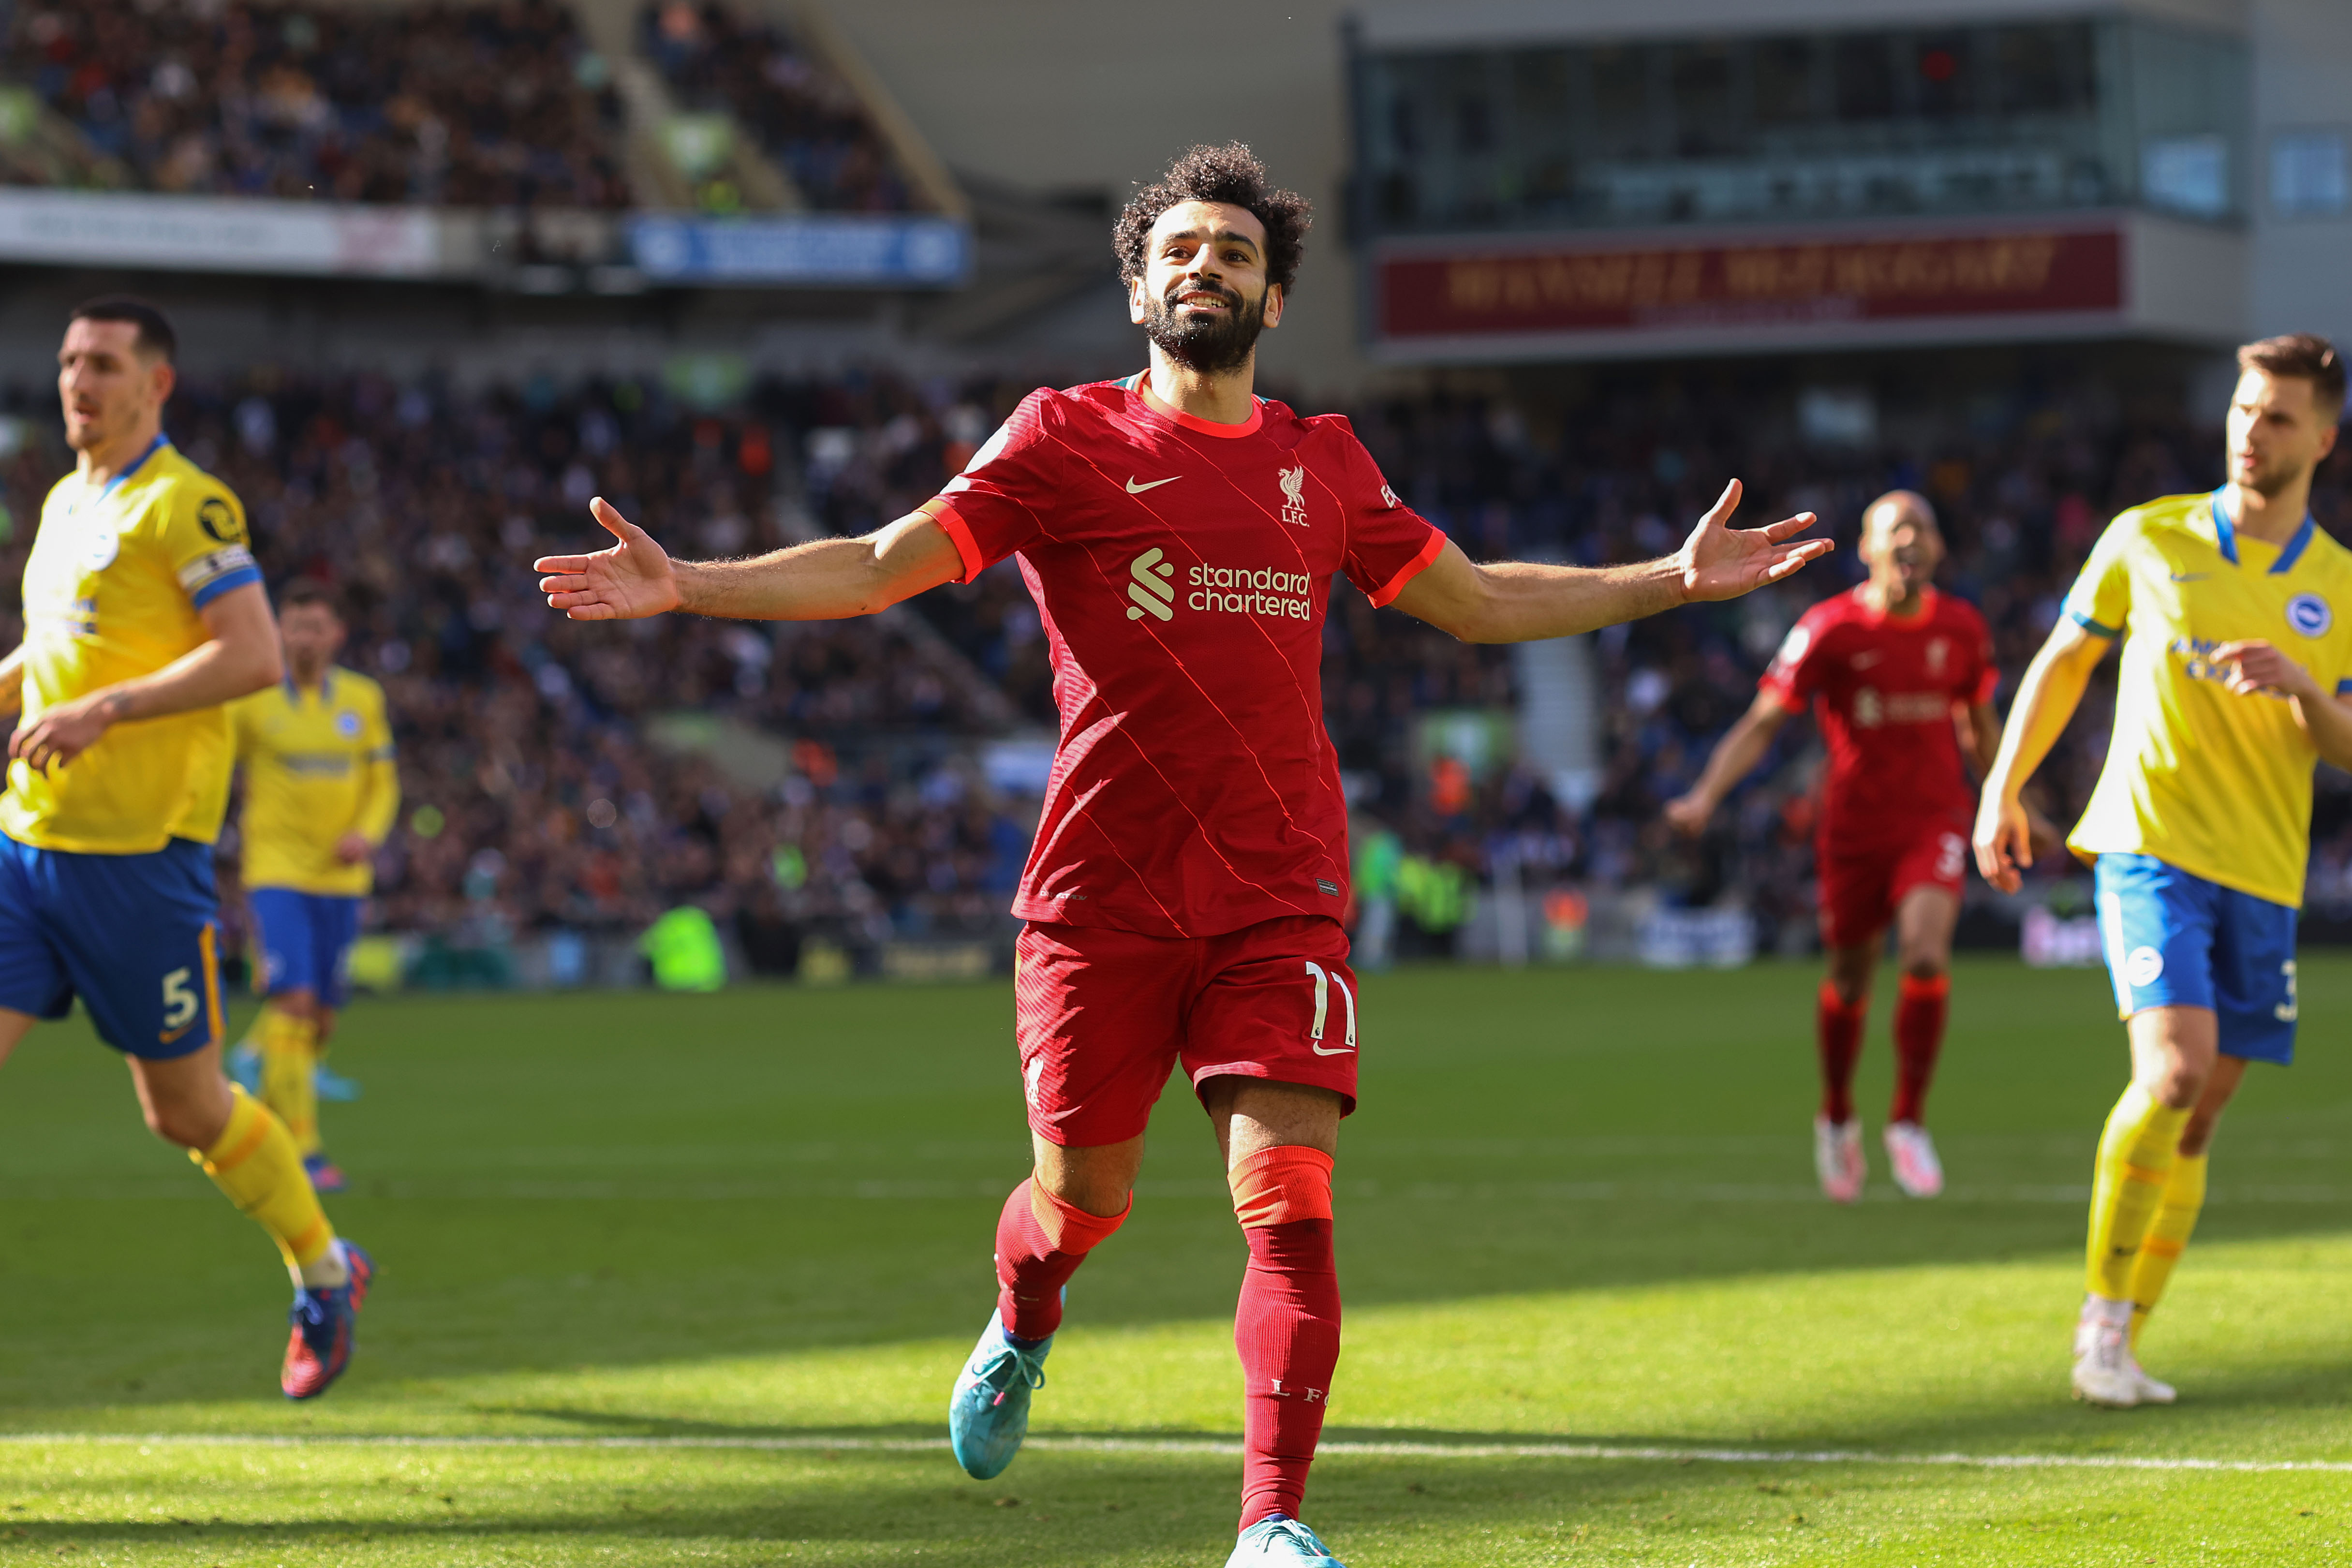 Mo Salah of Liverpool celebrates after a goal in the Premier League